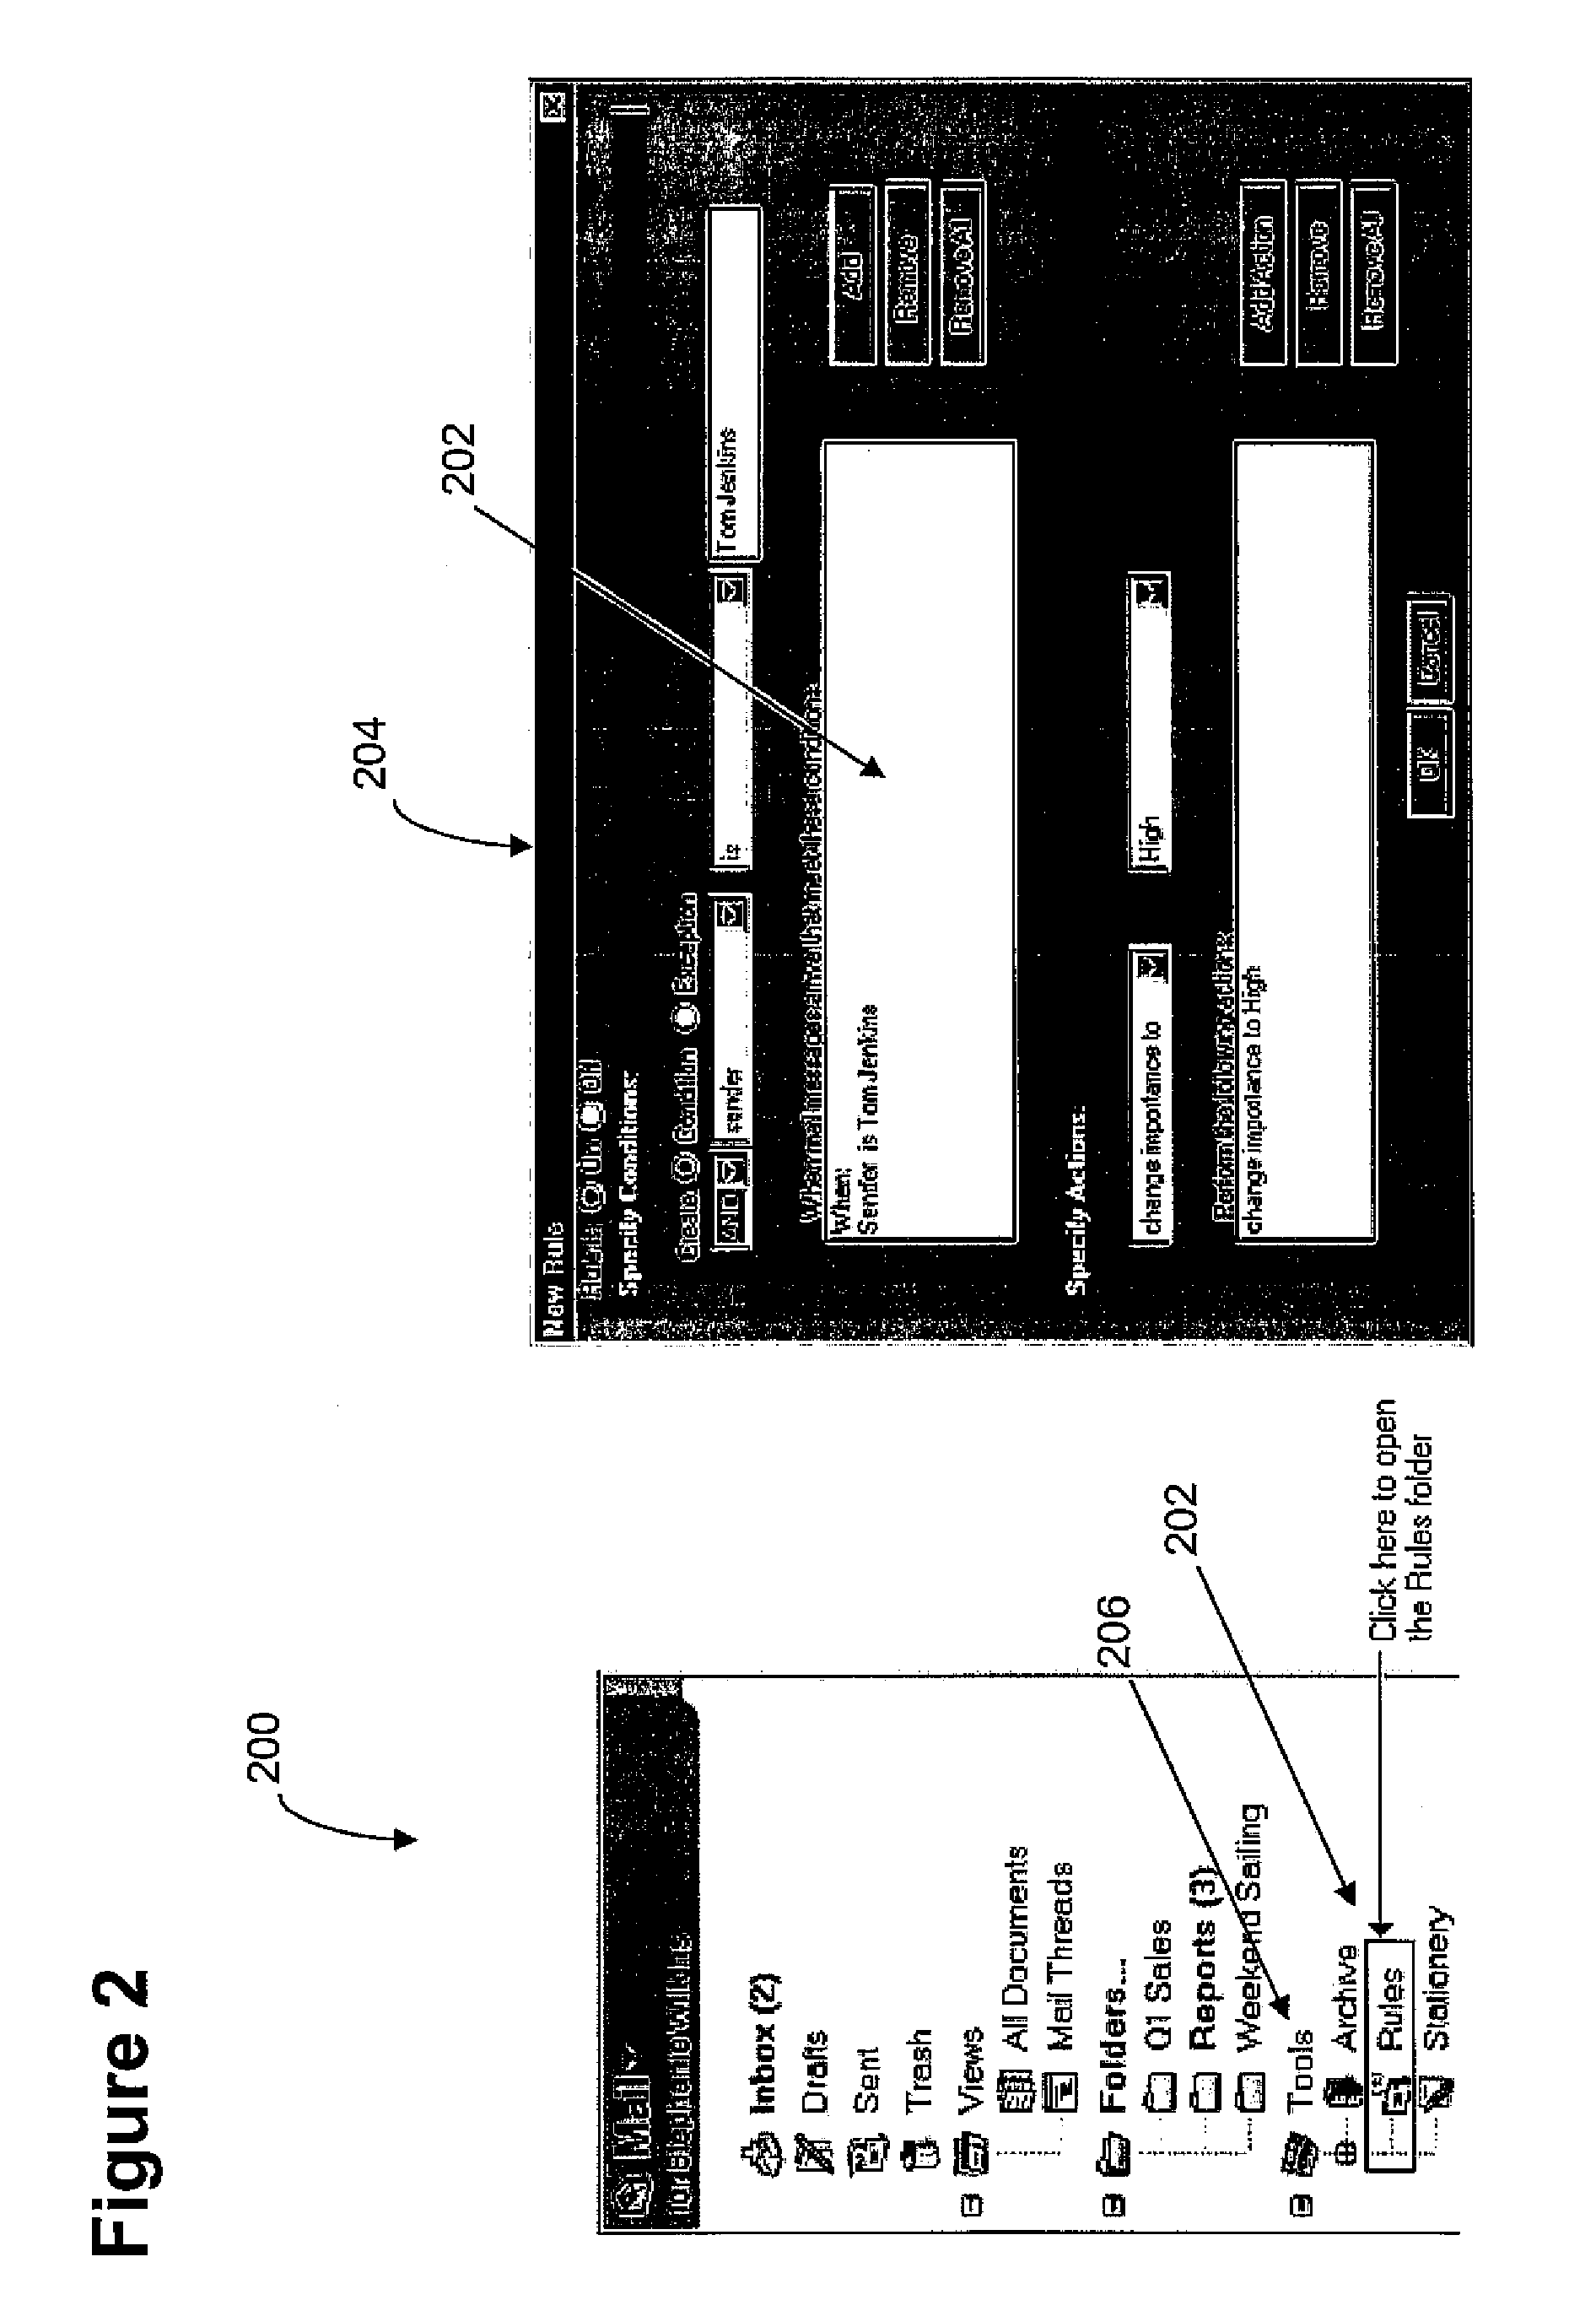 System and method for end-user management of E-mail threads using a single click